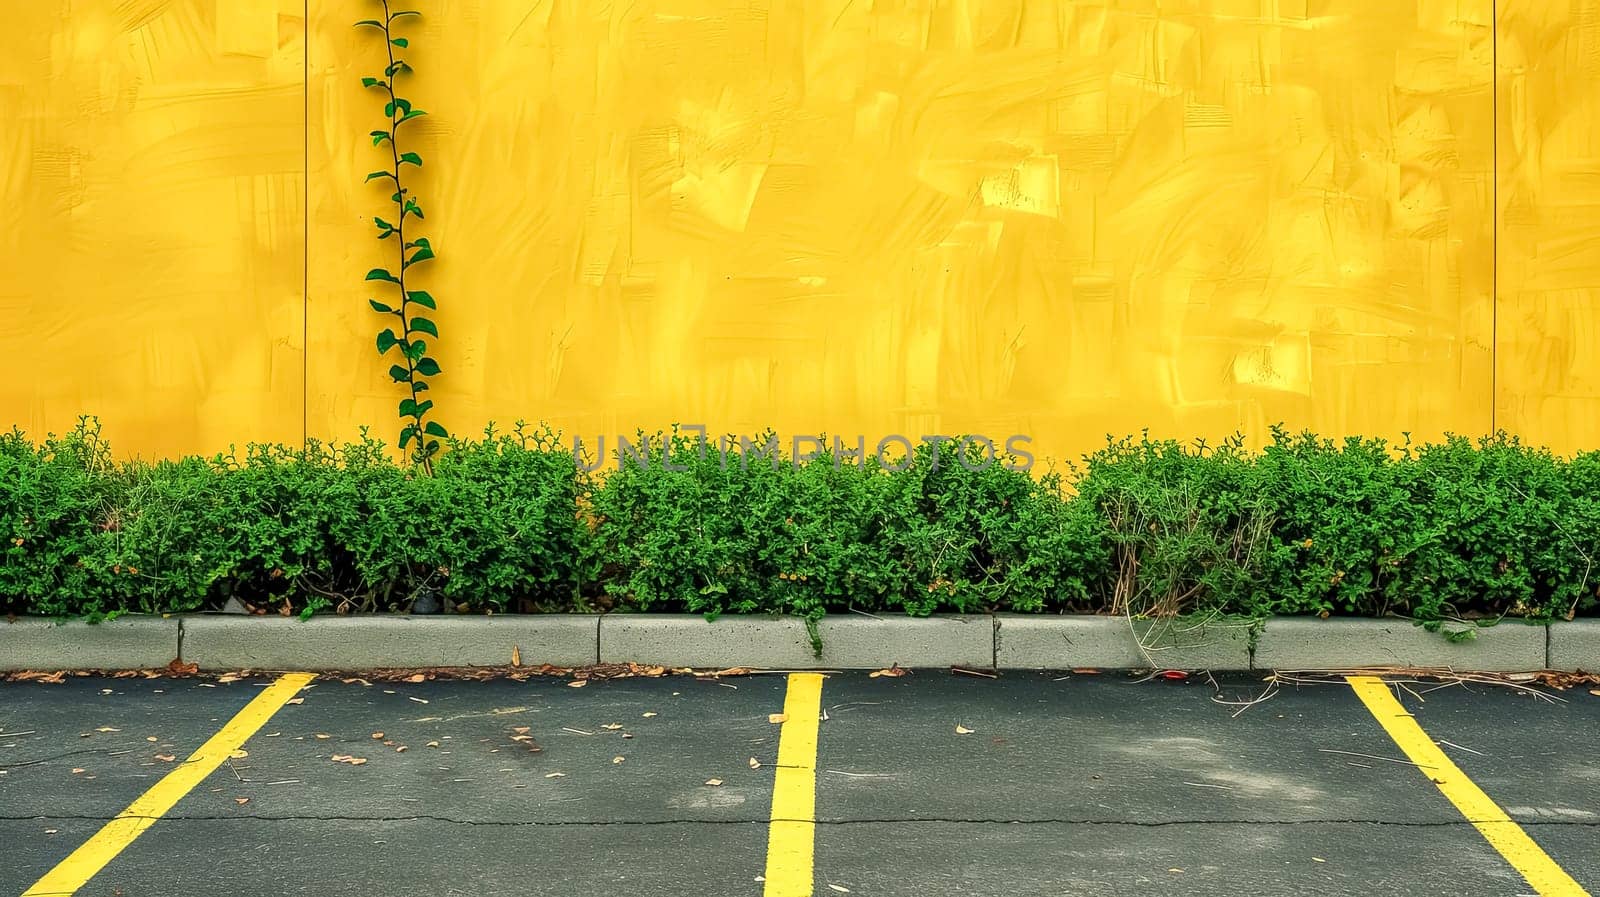 Green Vine on Yellow Wall with Parking Lot Lines, copy space